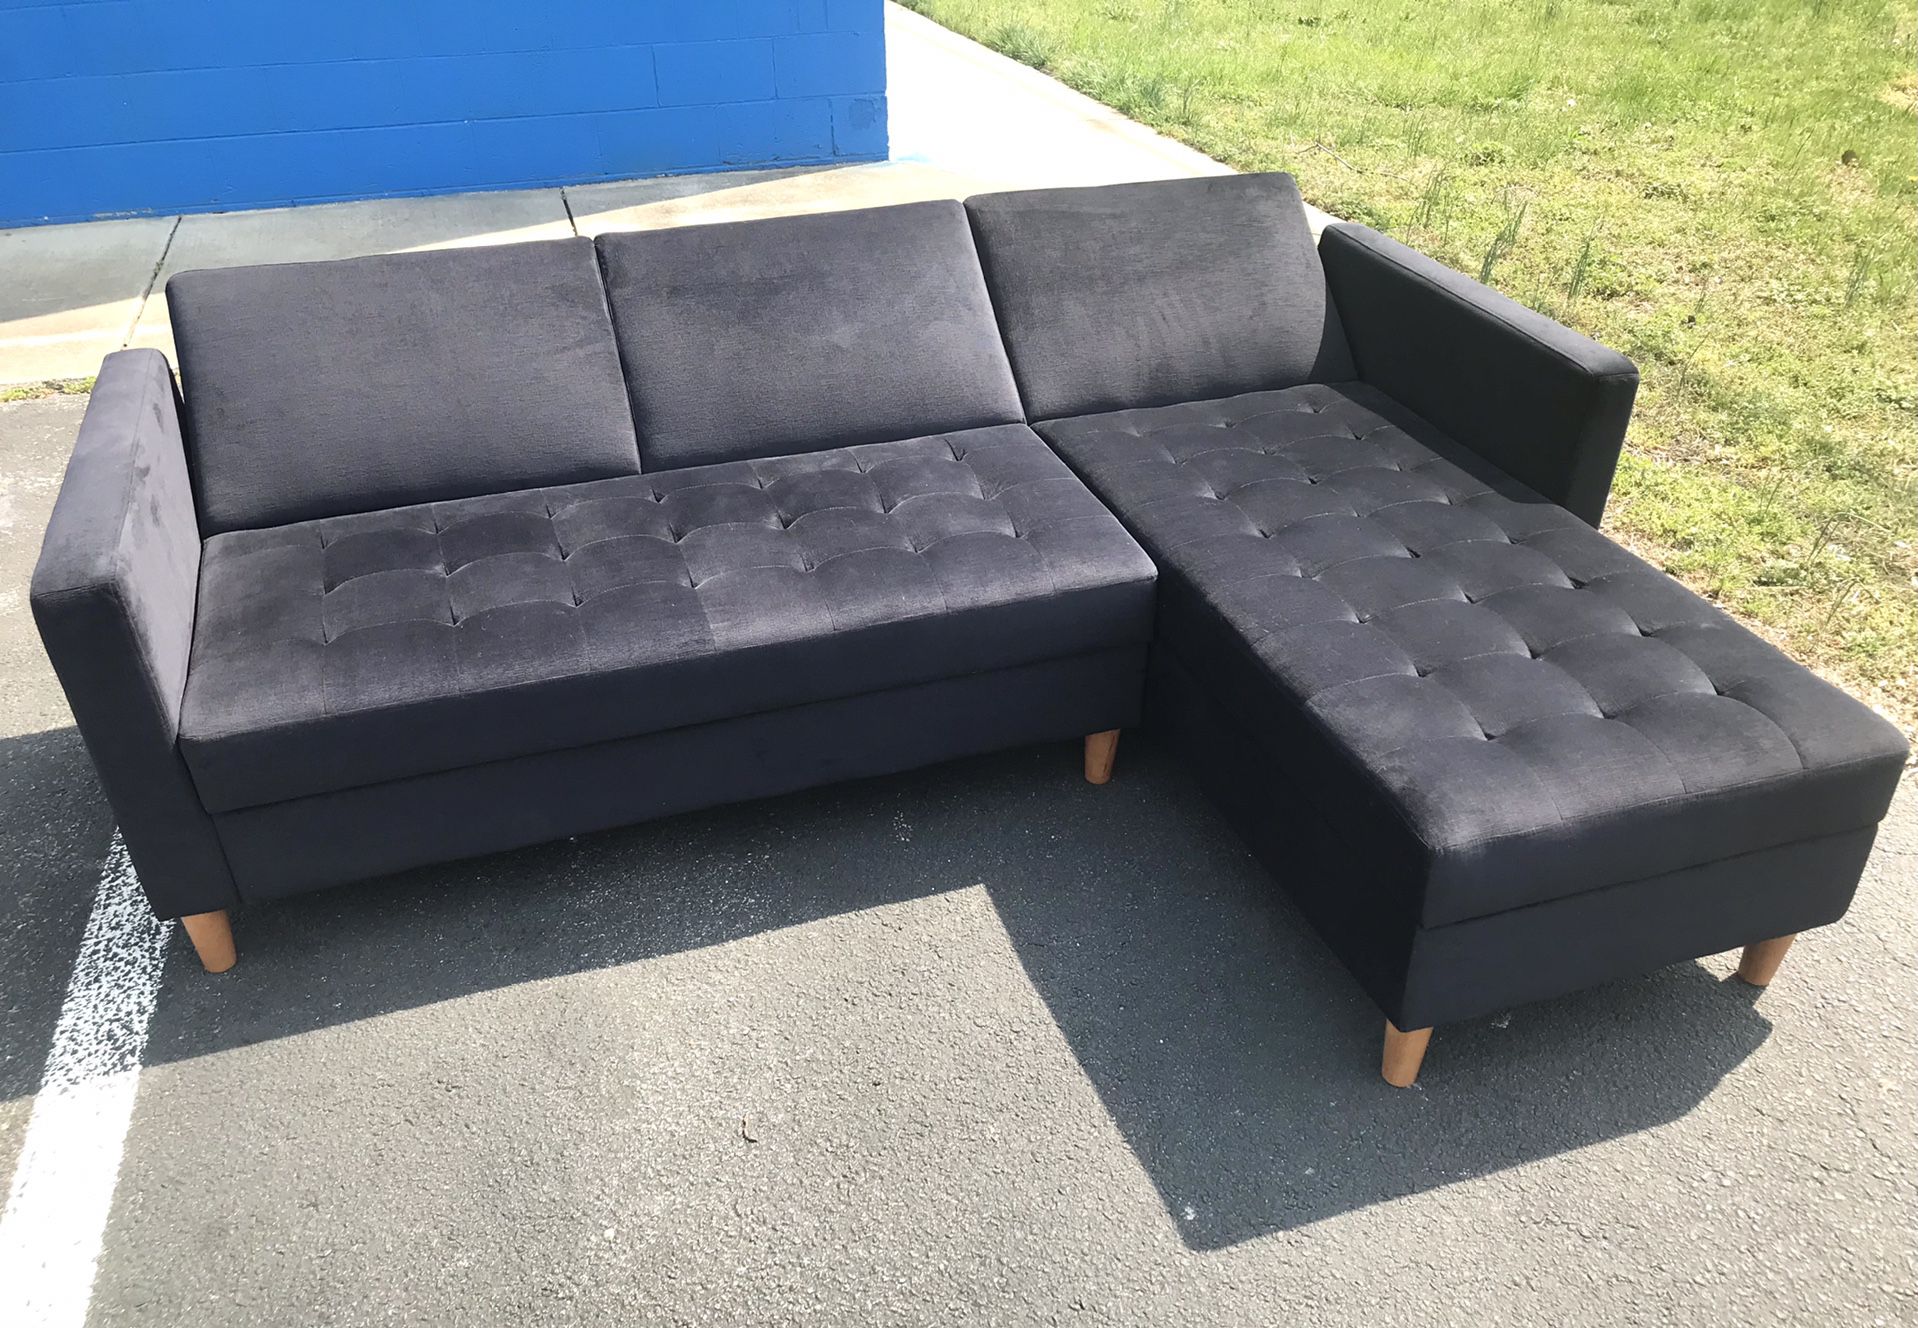 SUPER NICE! BRAND NEW BLACK VELVET SECTIONAL FUTON/ SOFA SLEEPER!! SOFT & COMFORTABLE!! RECLINES FROM SOFA TO BED!ALSO HAS STORAGE COMPARTMENT!!